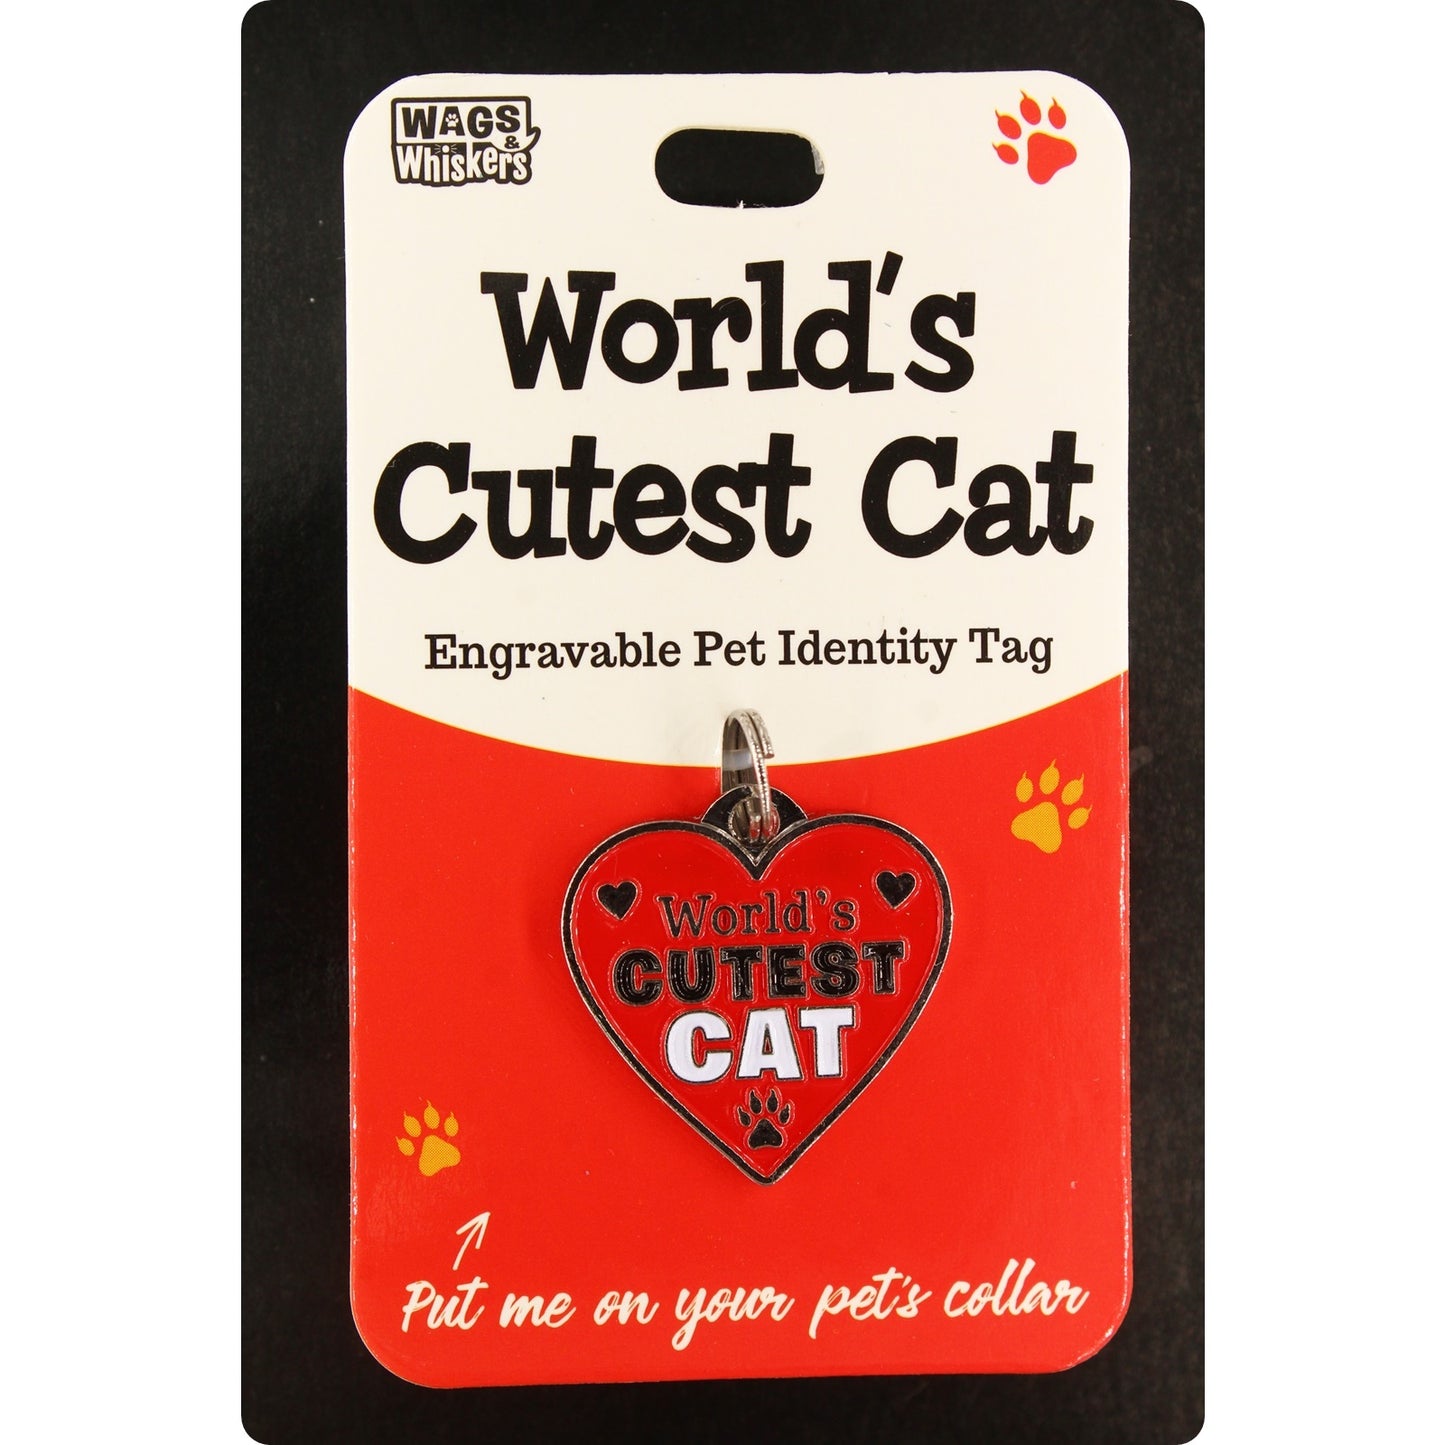 DESIRABLE GIFTS WORLD'S CUTEST CAT WAGS & WHISKERS CAT PET TAG I CAN NOT ENGRAVE THIS ITEM